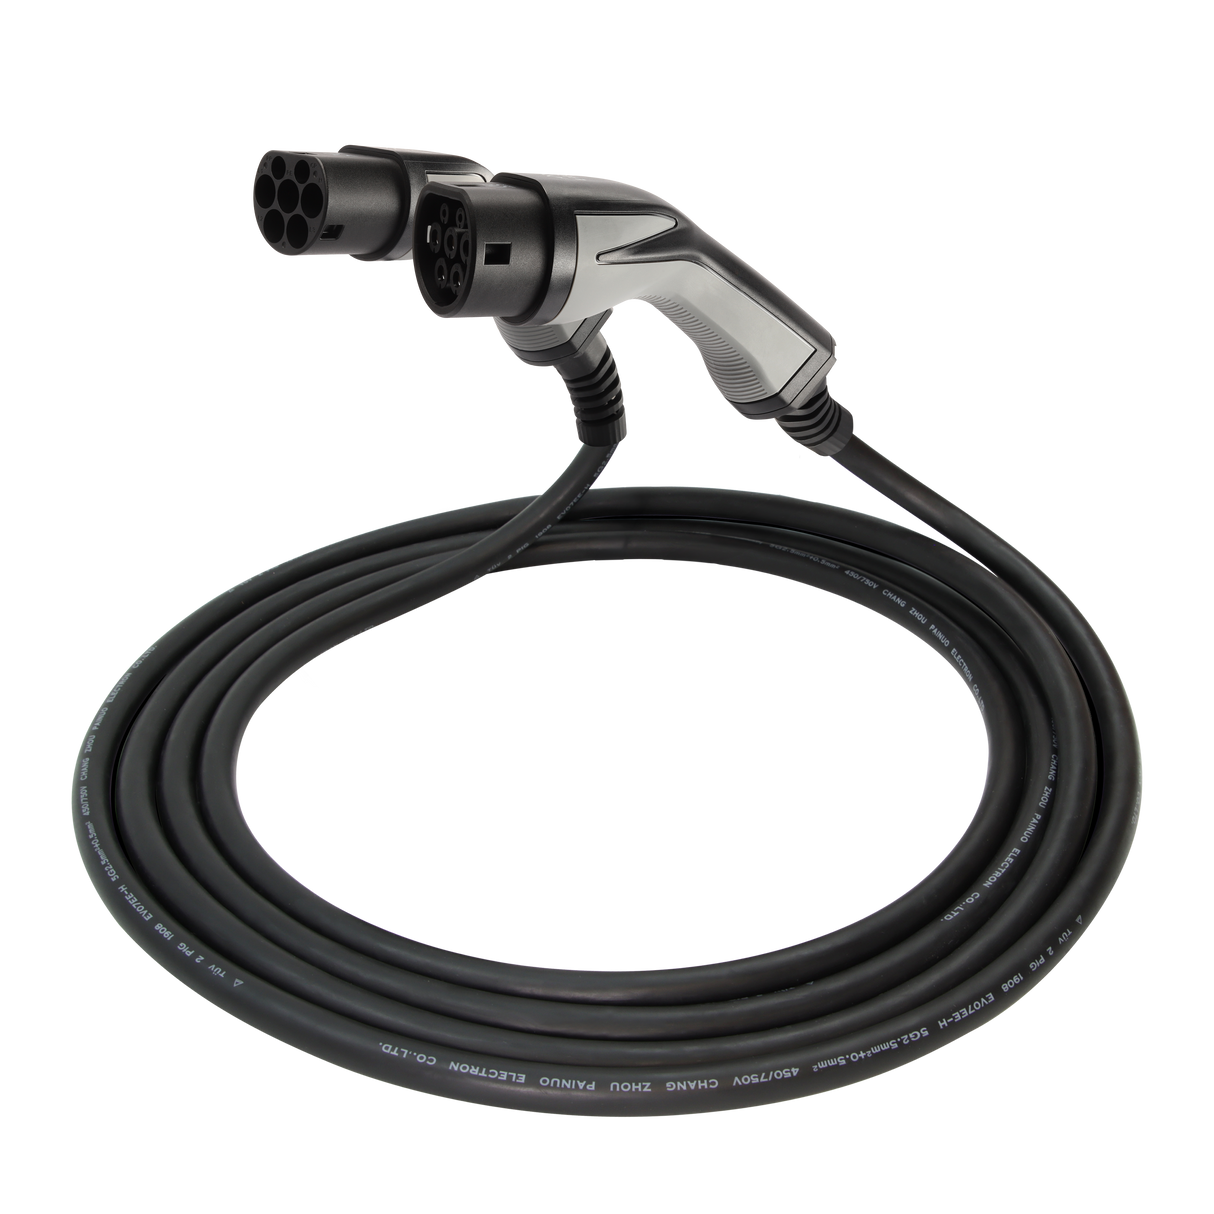 Charging cable Audi Q5 - Erock Pro Type 2 - 16A 3 phase (11 kW)